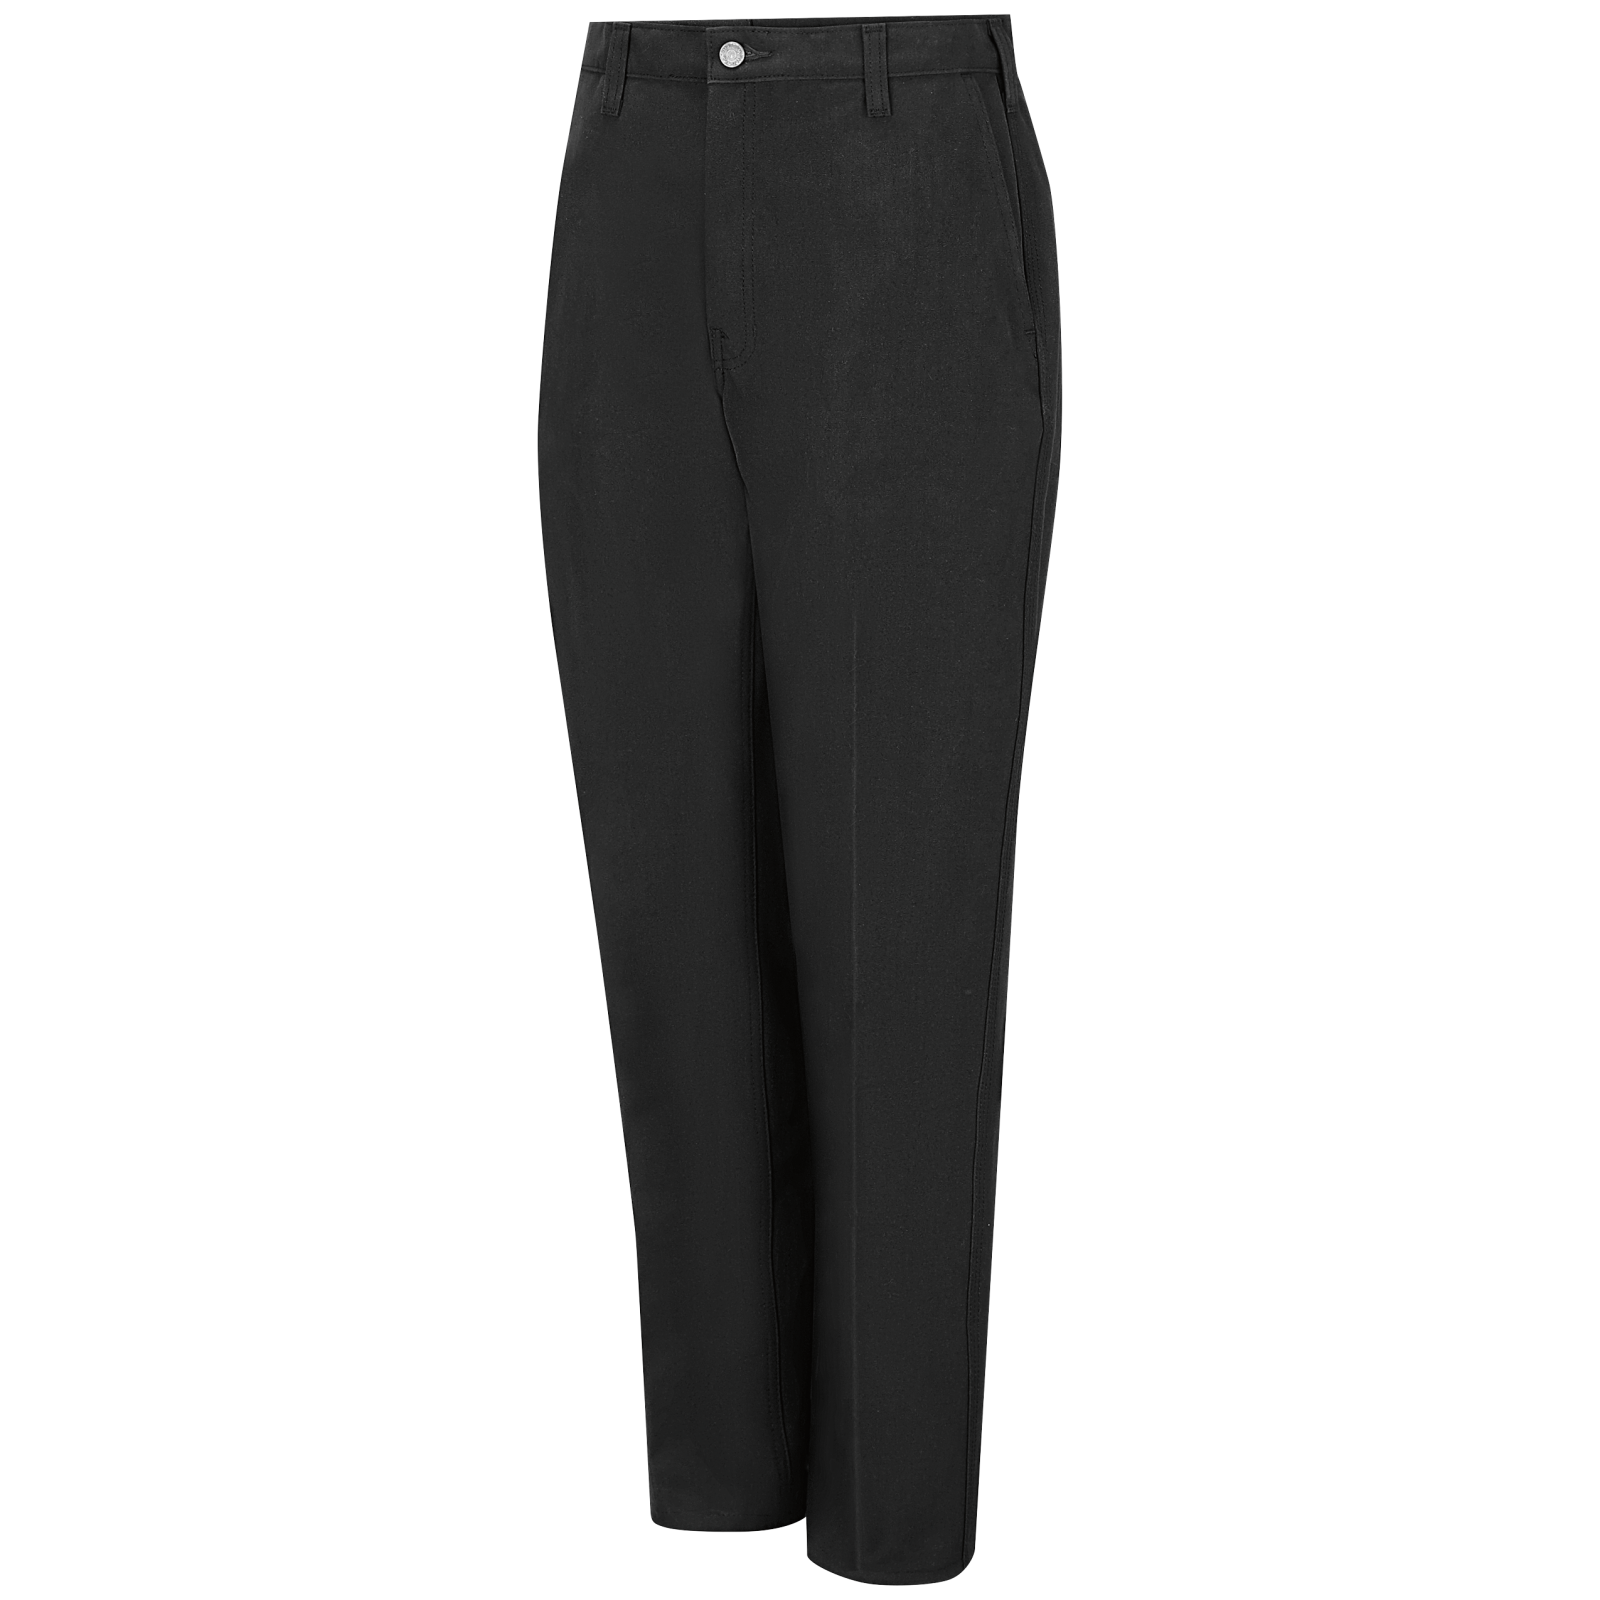 Workrite Classic Firefighter Pant (FP50) | The Fire Center | Fuego Fire Center | FIREFIGHTER GEAR | Our Classic line is made with Nomex® IIIA fabric, and autoclaved with our proprietary PerfectPress® process, so that Workrite® Fire Service Firefighter pants retain their professional, just pressed appearance right out of the dryer.